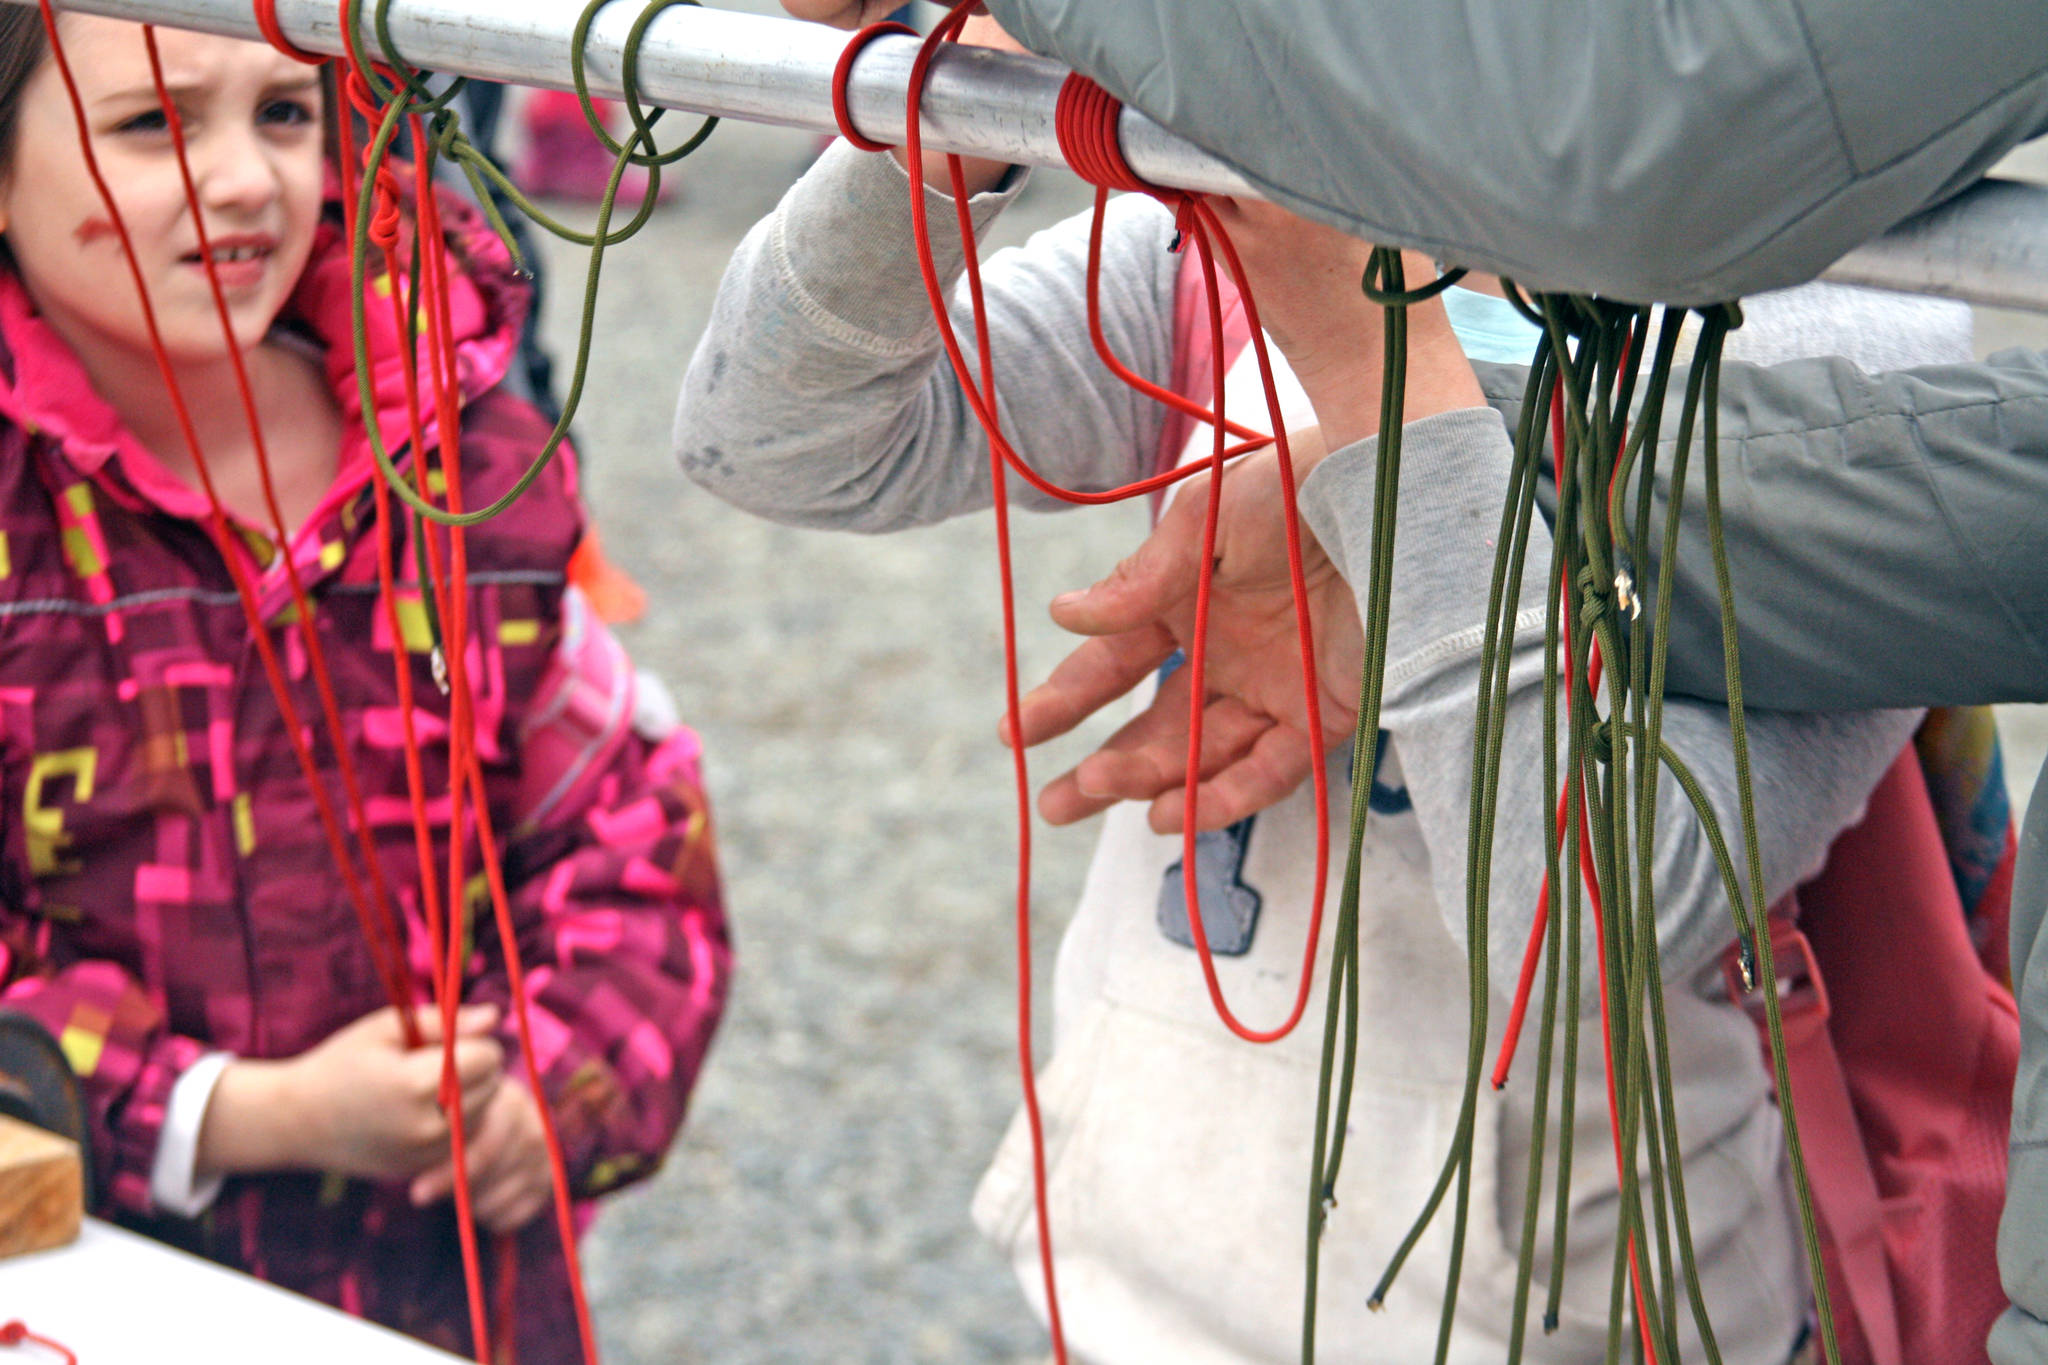 Students participate in a knot-tying demonstration during the 18th Annual Kenai Peninsula Salmon Celebration at Johnson Lake State Recreation Site in Kasilof. The fish-release event featured hands-on activity and demonstration booths focused around wildlife education and safety. (Photo by Erin Thompson/Peninsula Clarion)